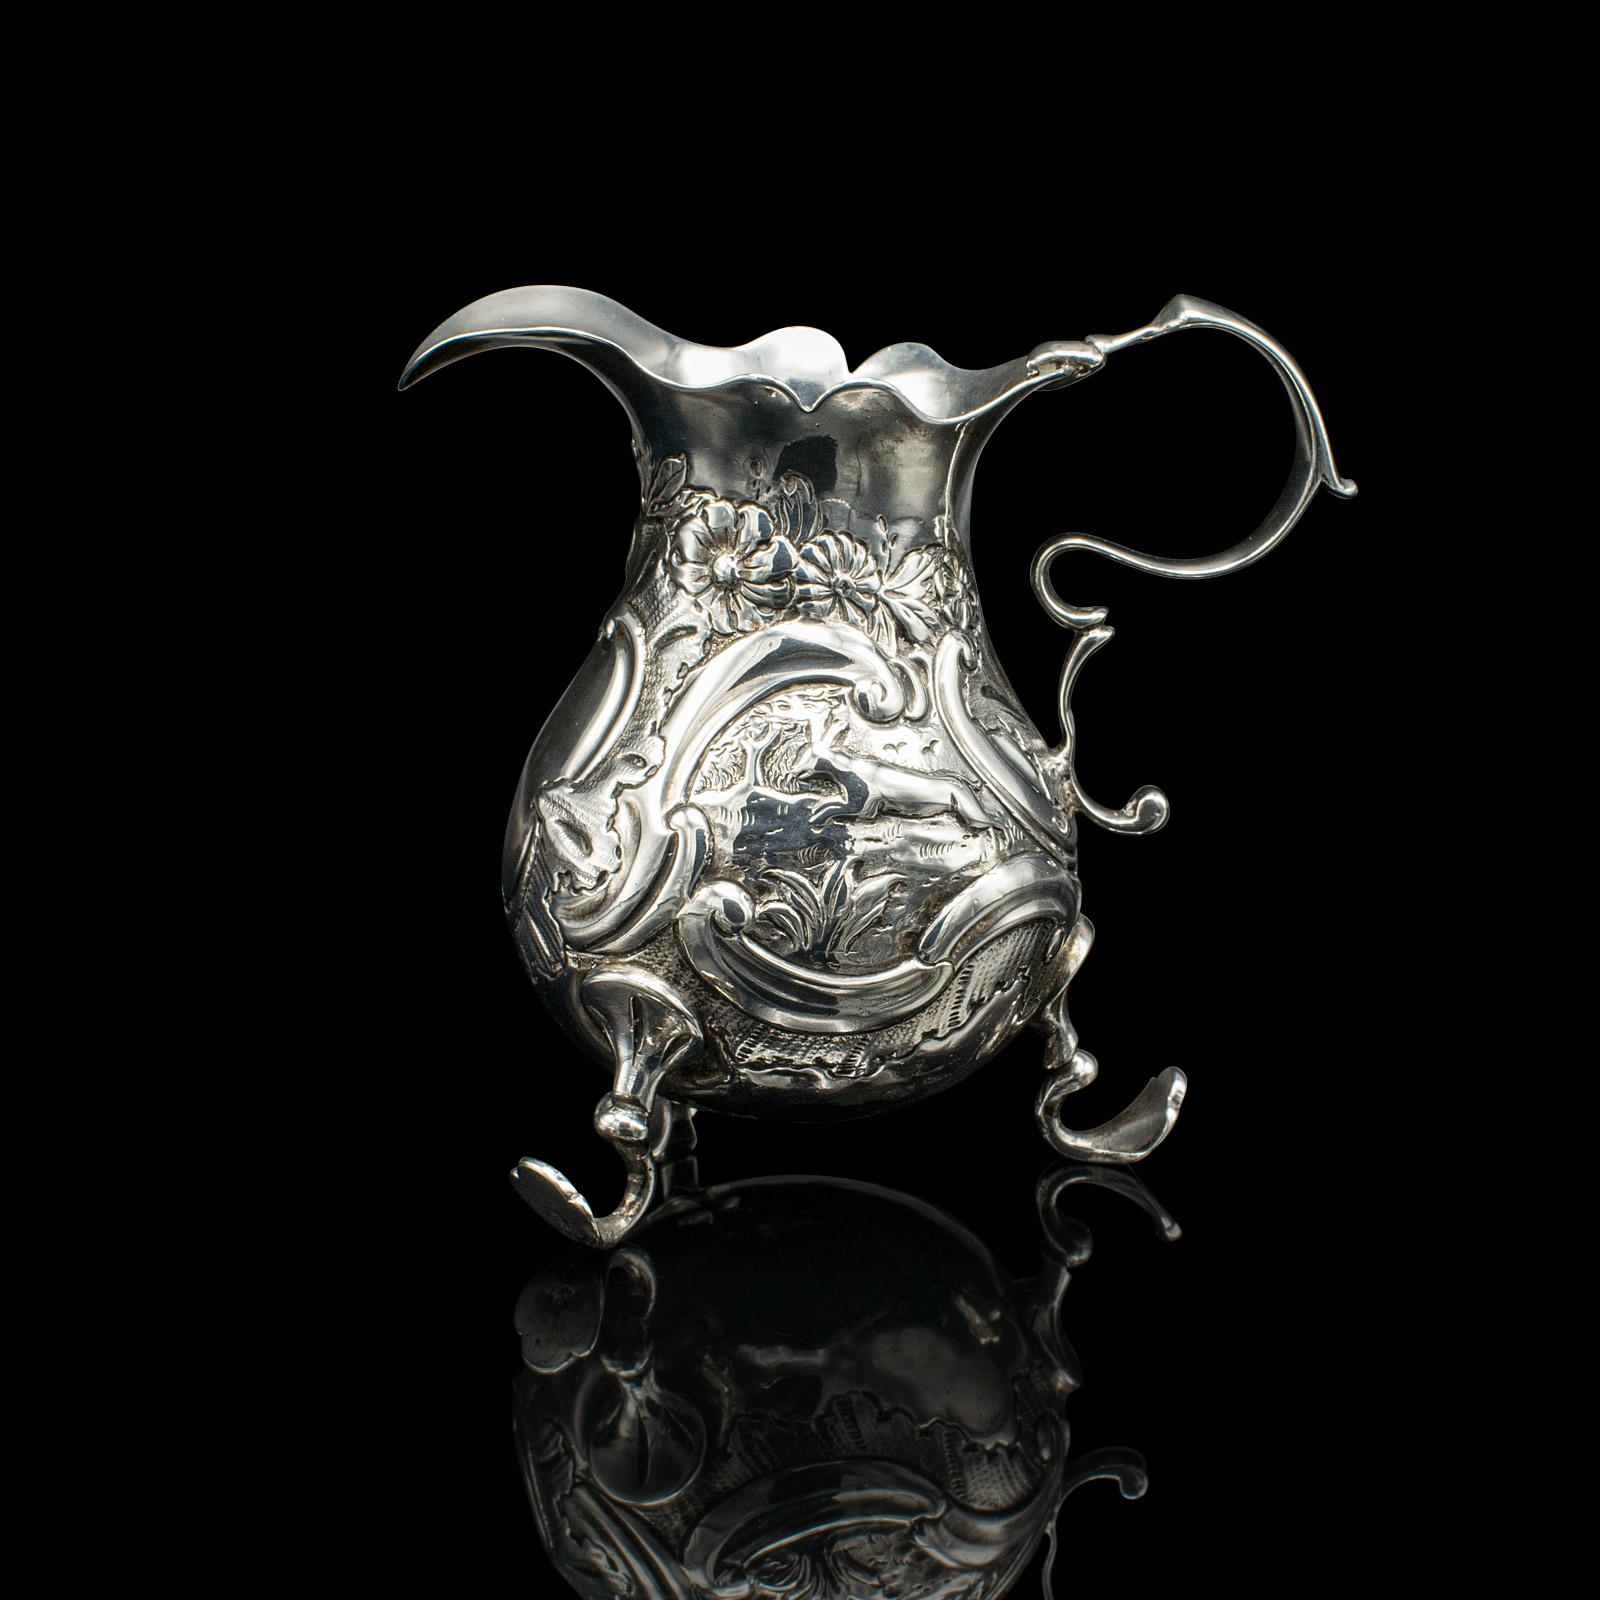 This is a small antique milk pouring jug. An English, silver breakfast table creamer, dating to the Georgian period, circa 1800.

Charmingly ornate and petite, with an appealing shine
Displays a desirable aged patina and in good original